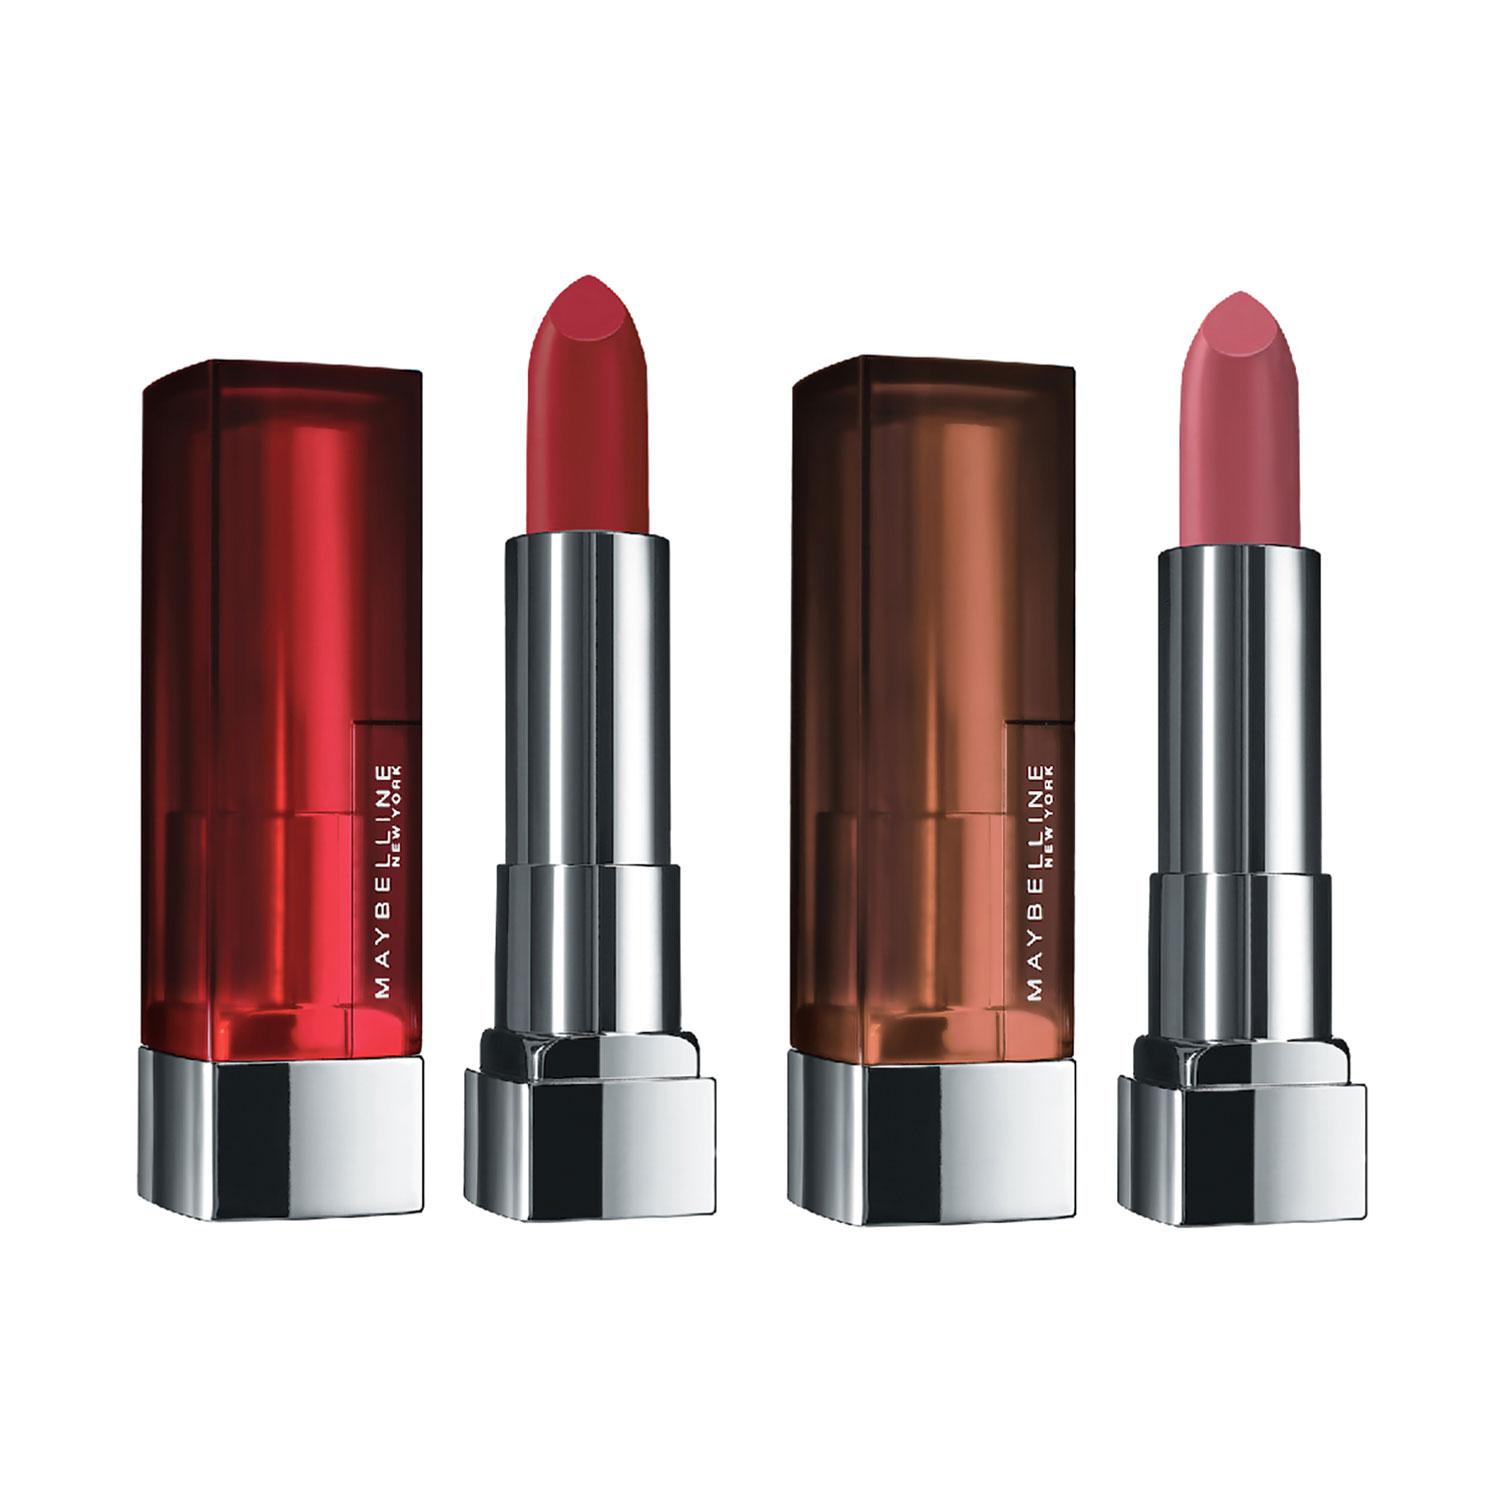 Maybelline New York | Maybelline New York Color Sensational Creamy Matte Lipstick Pack of 2 (Shades 691 & 660)